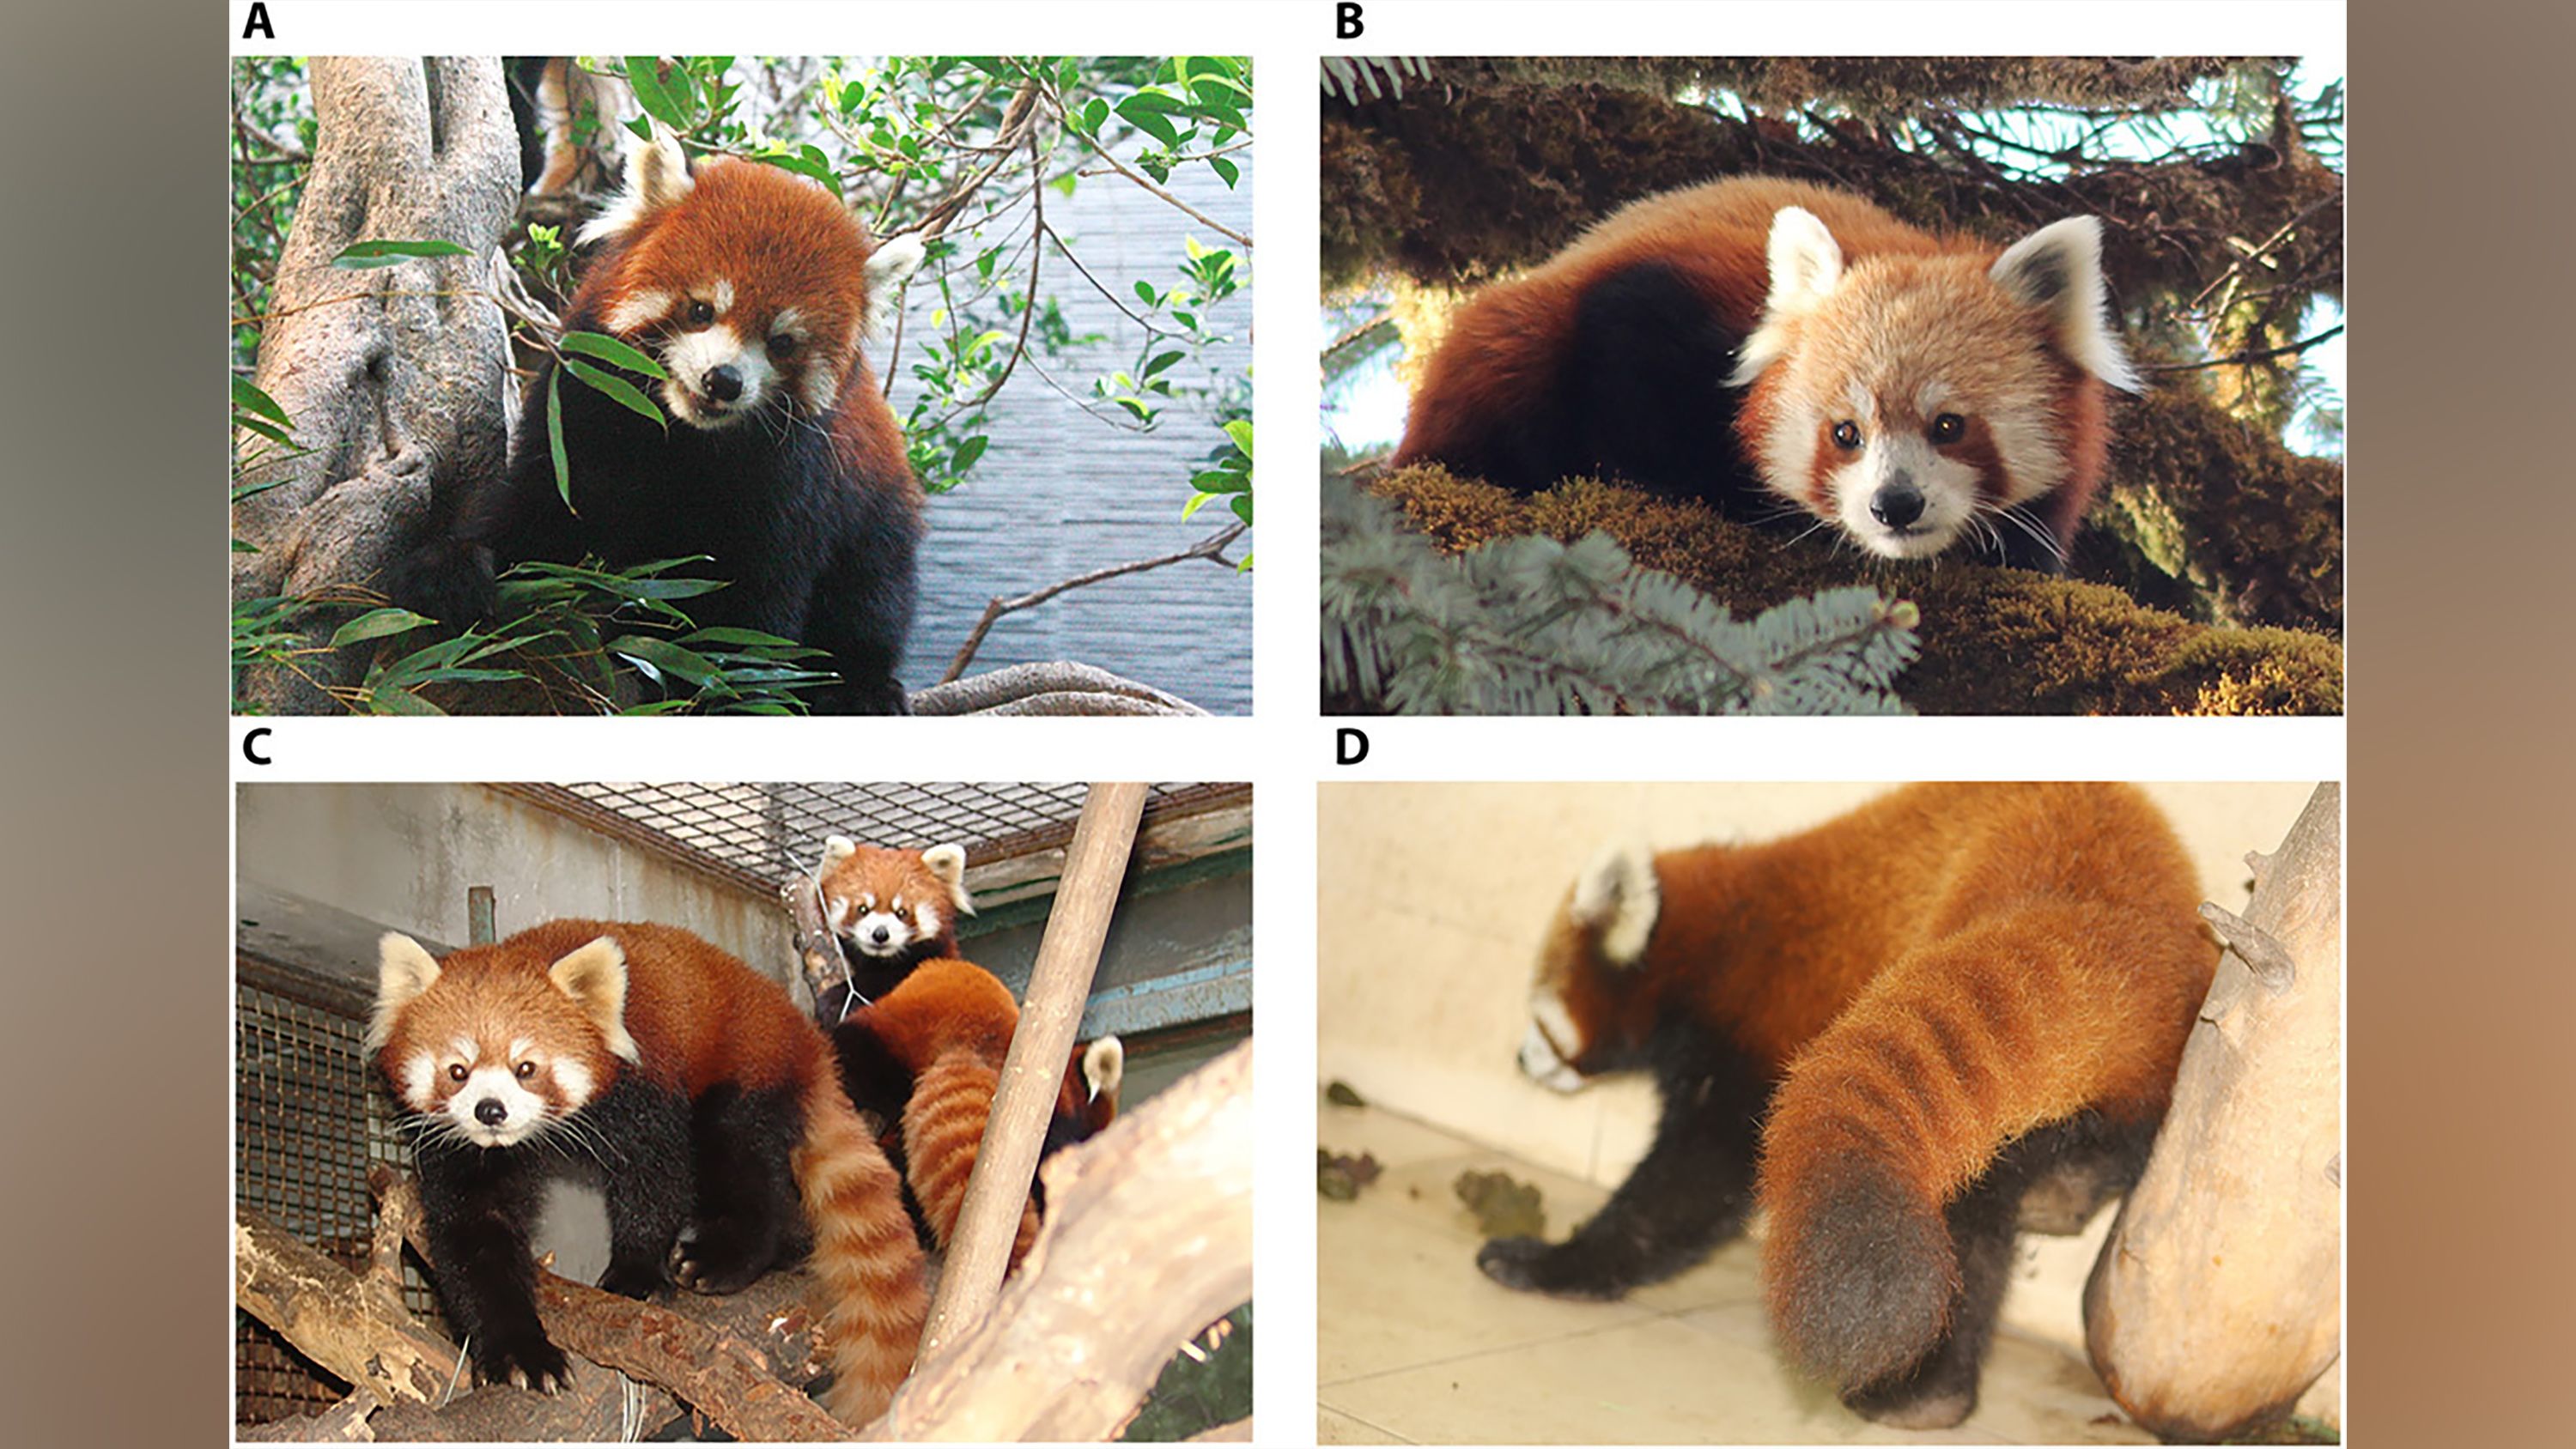 There are two species of red panda, not one |